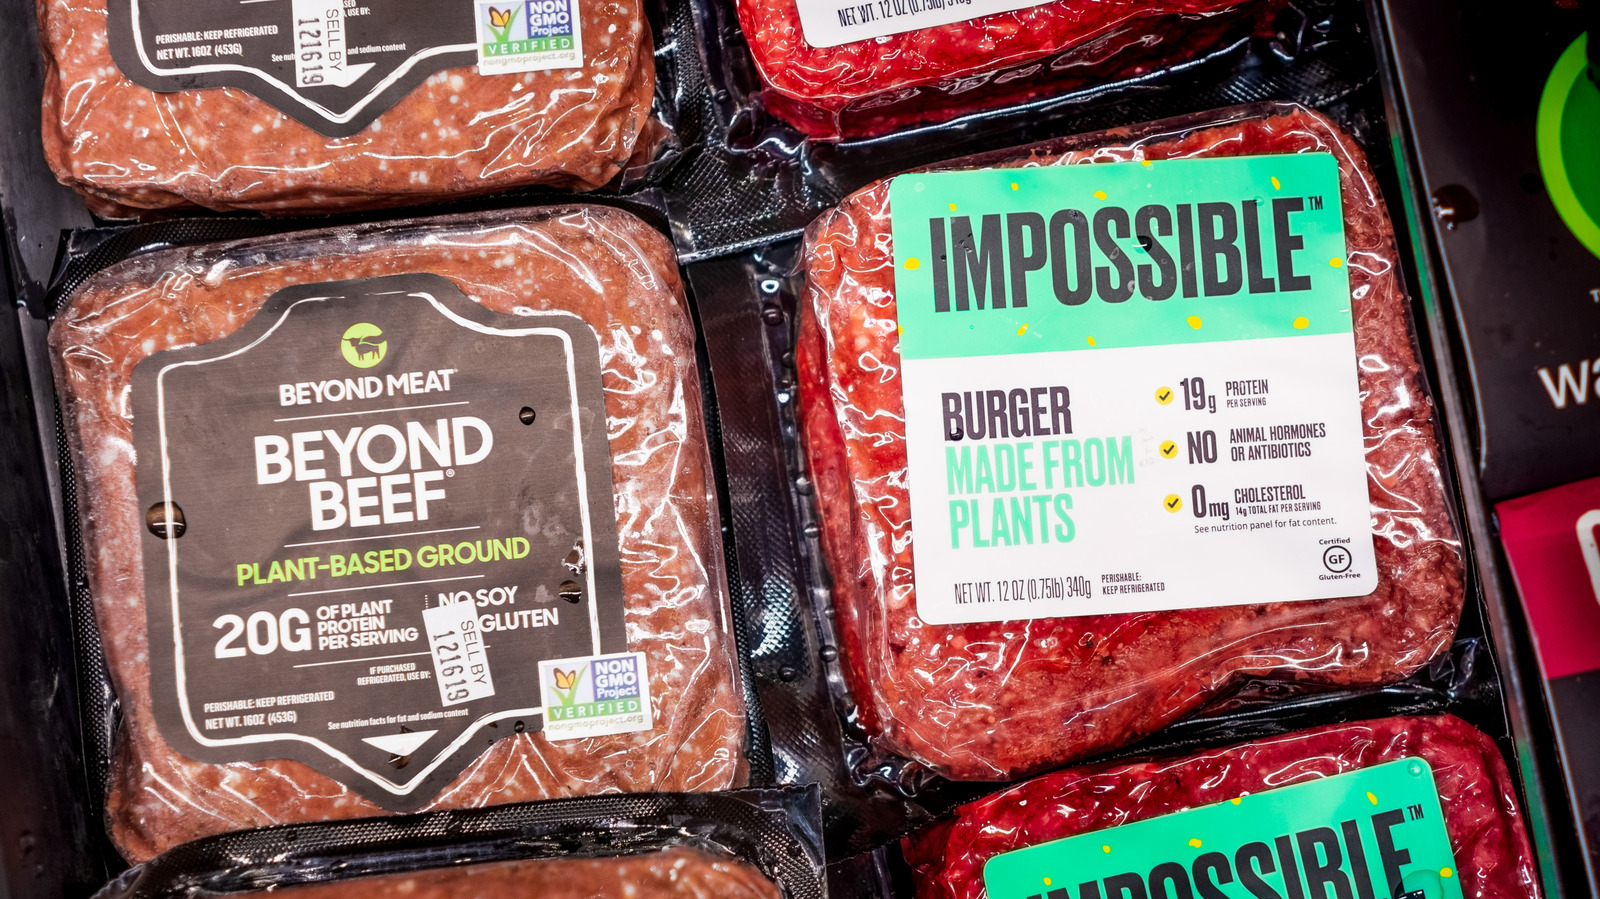 What's The Difference Between An Impossible Burger And A Beyond Burger?